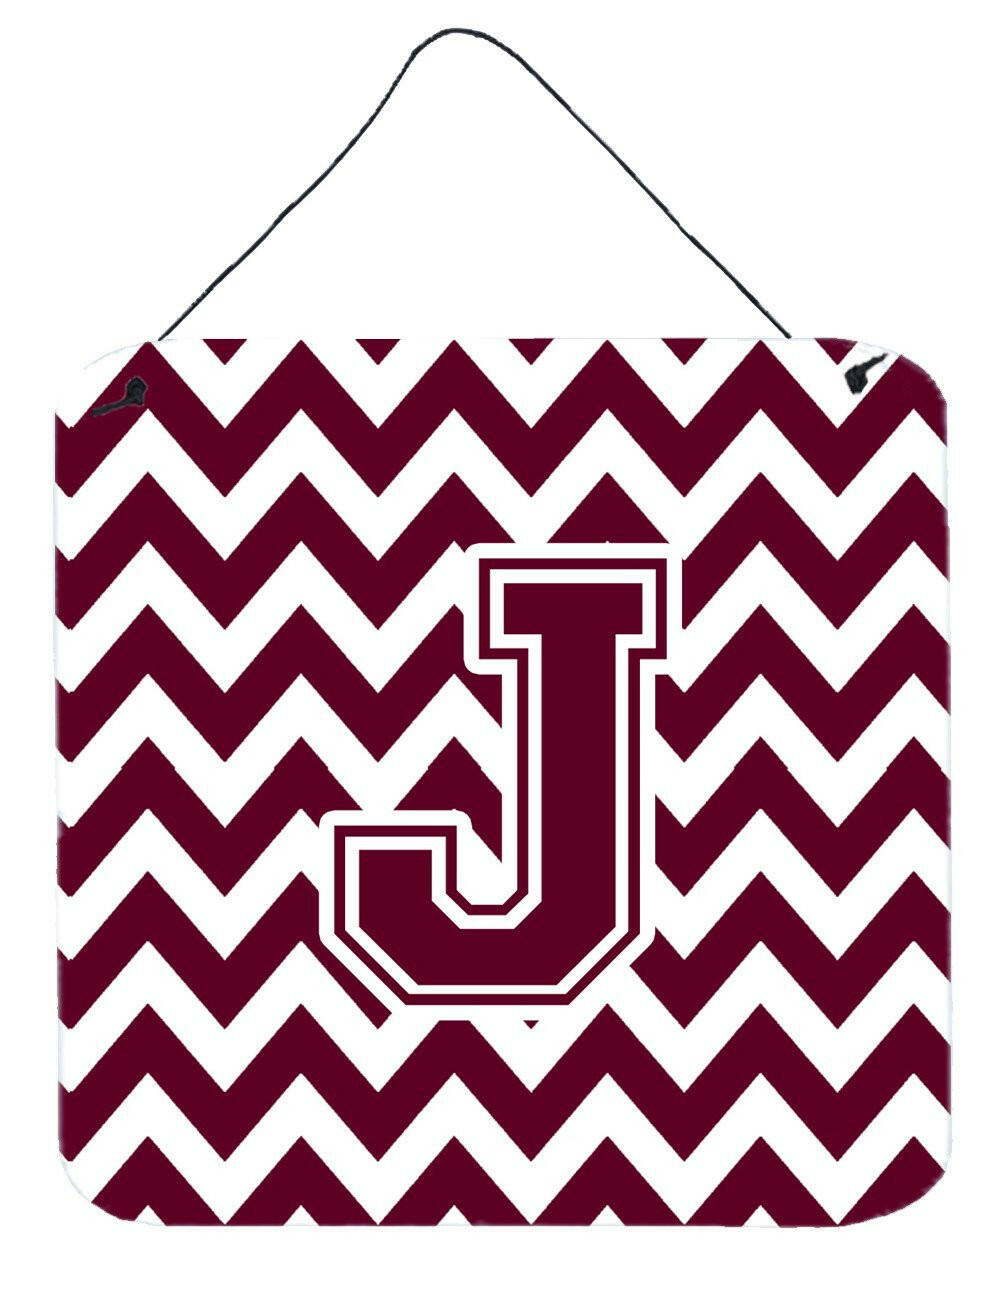 Letter J Chevron Maroon and White  Wall or Door Hanging Prints CJ1051-JDS66 by Caroline's Treasures